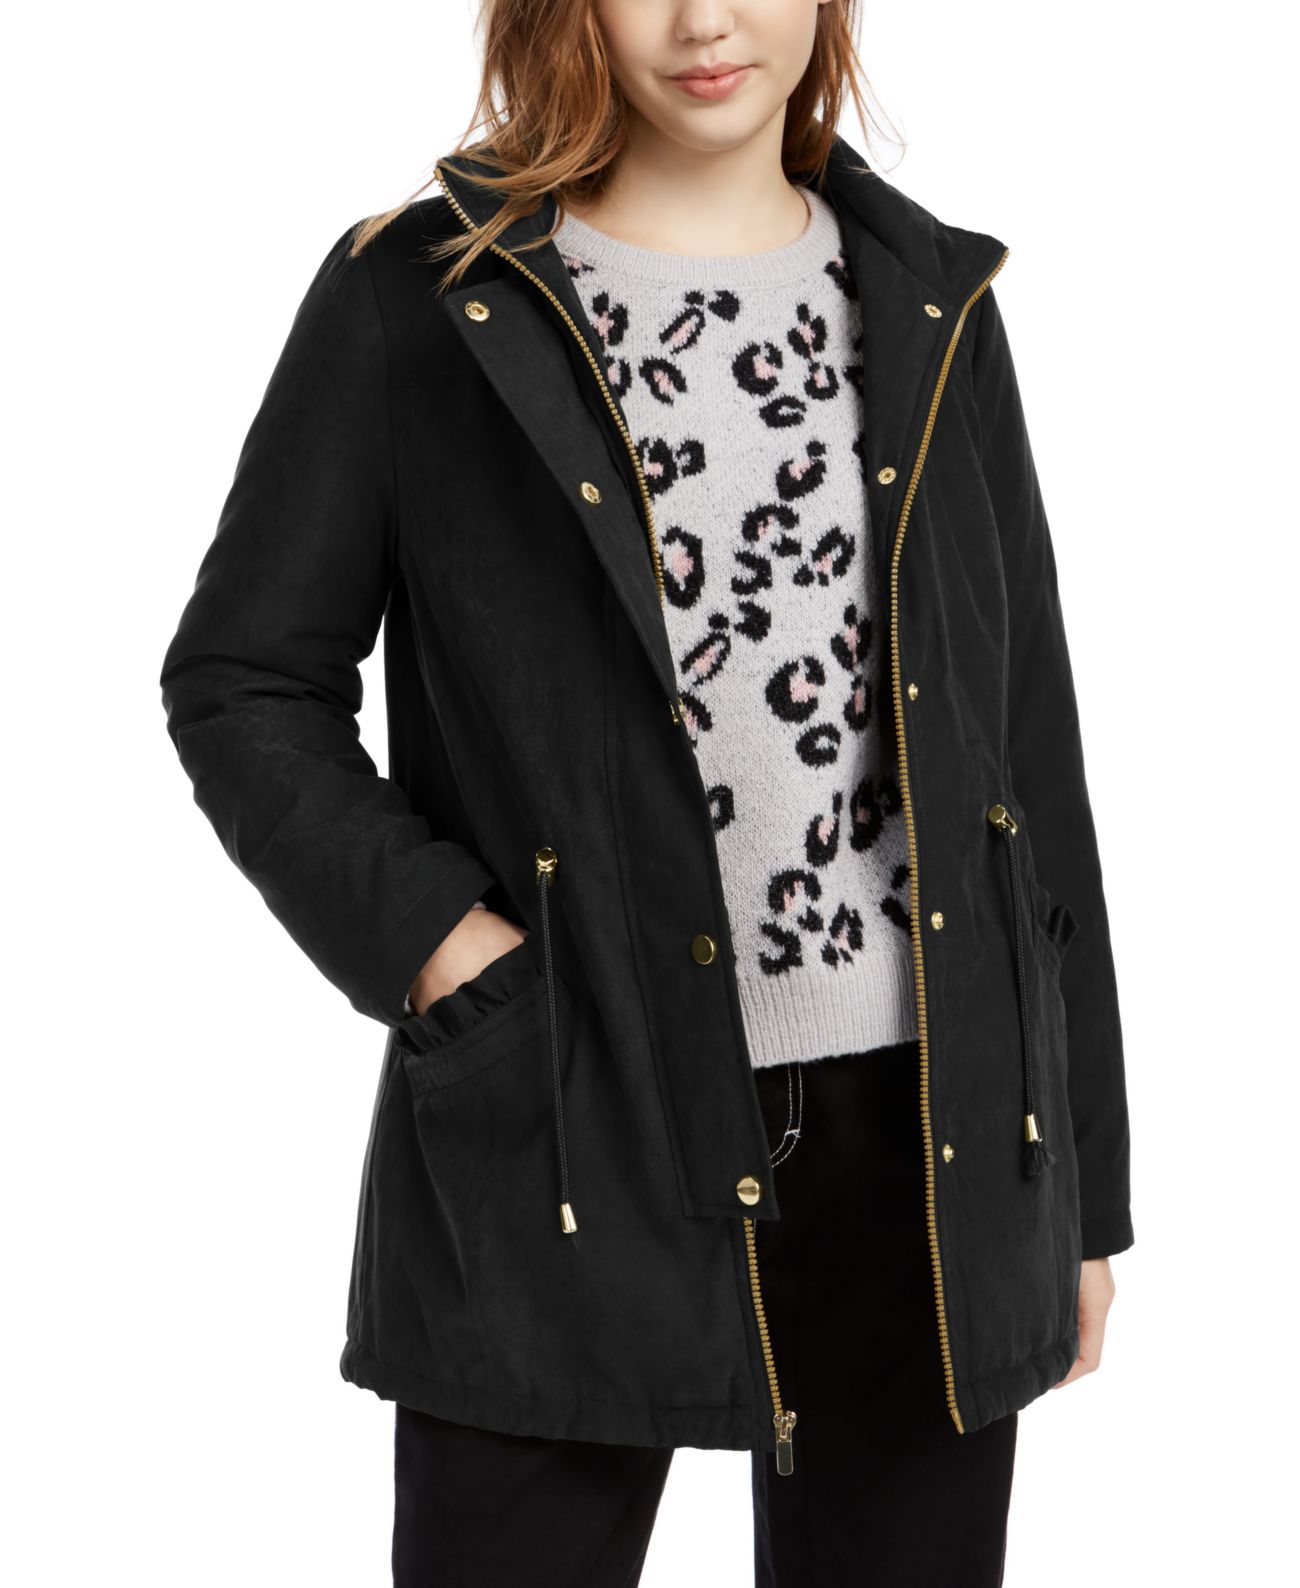 Celebrity Pink Juniors&#8217; Faux-Fur Trim Hooded Parka Coats, Black, Small - image 3 of 4